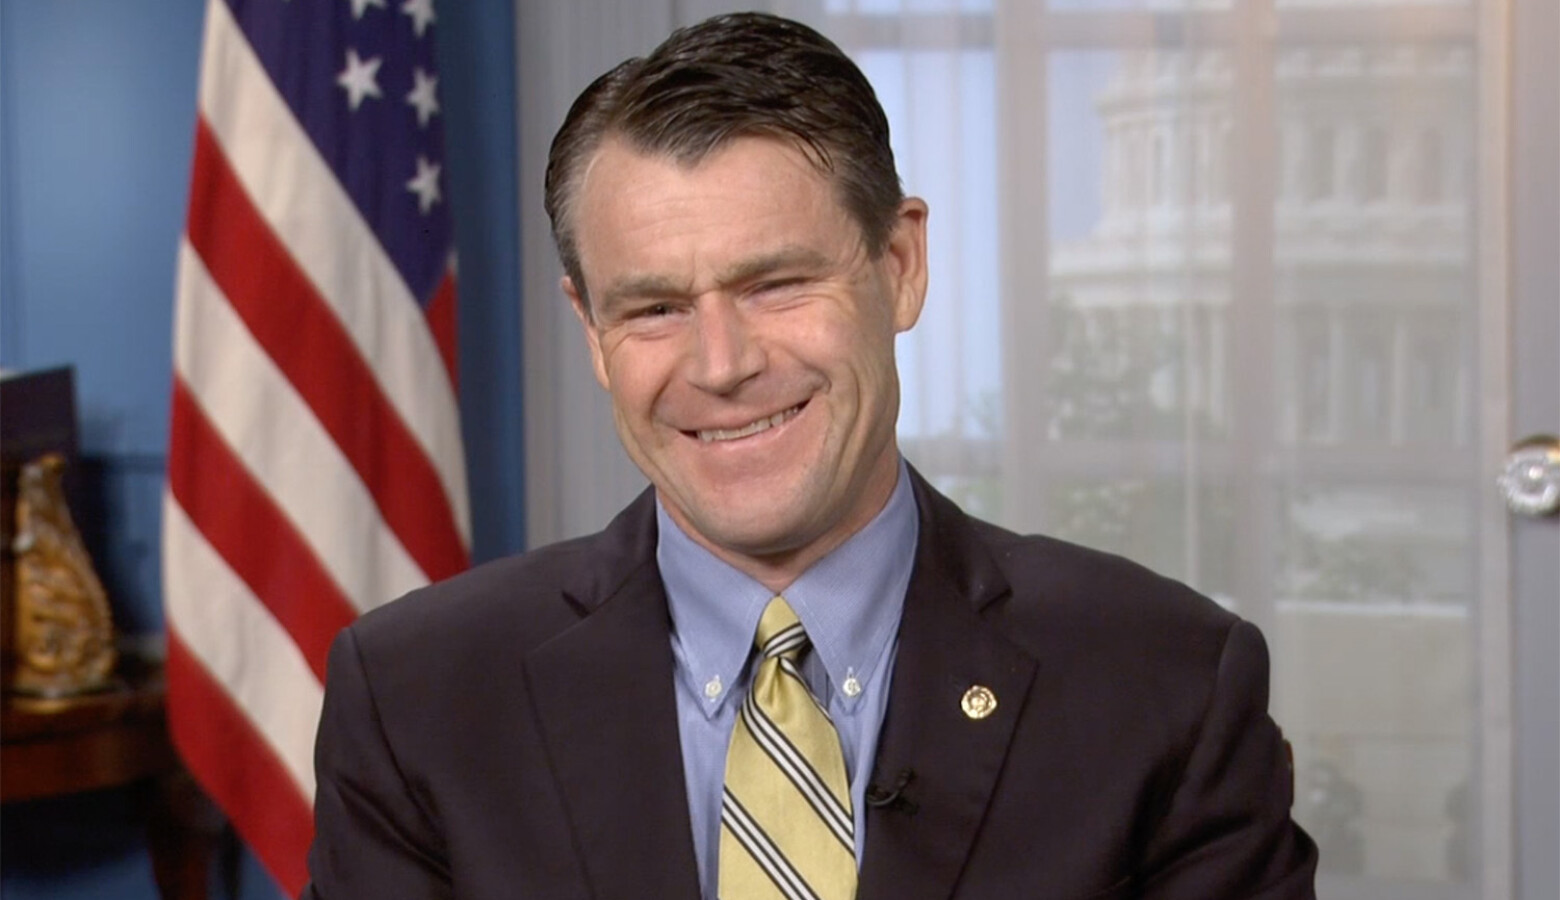 U.S. Sen. Todd Young (R-Ind.) says he supports a “path to legal status” for DACA recipients, known as Dreamers, as part of a broader immigration reform package. (Screenshot)